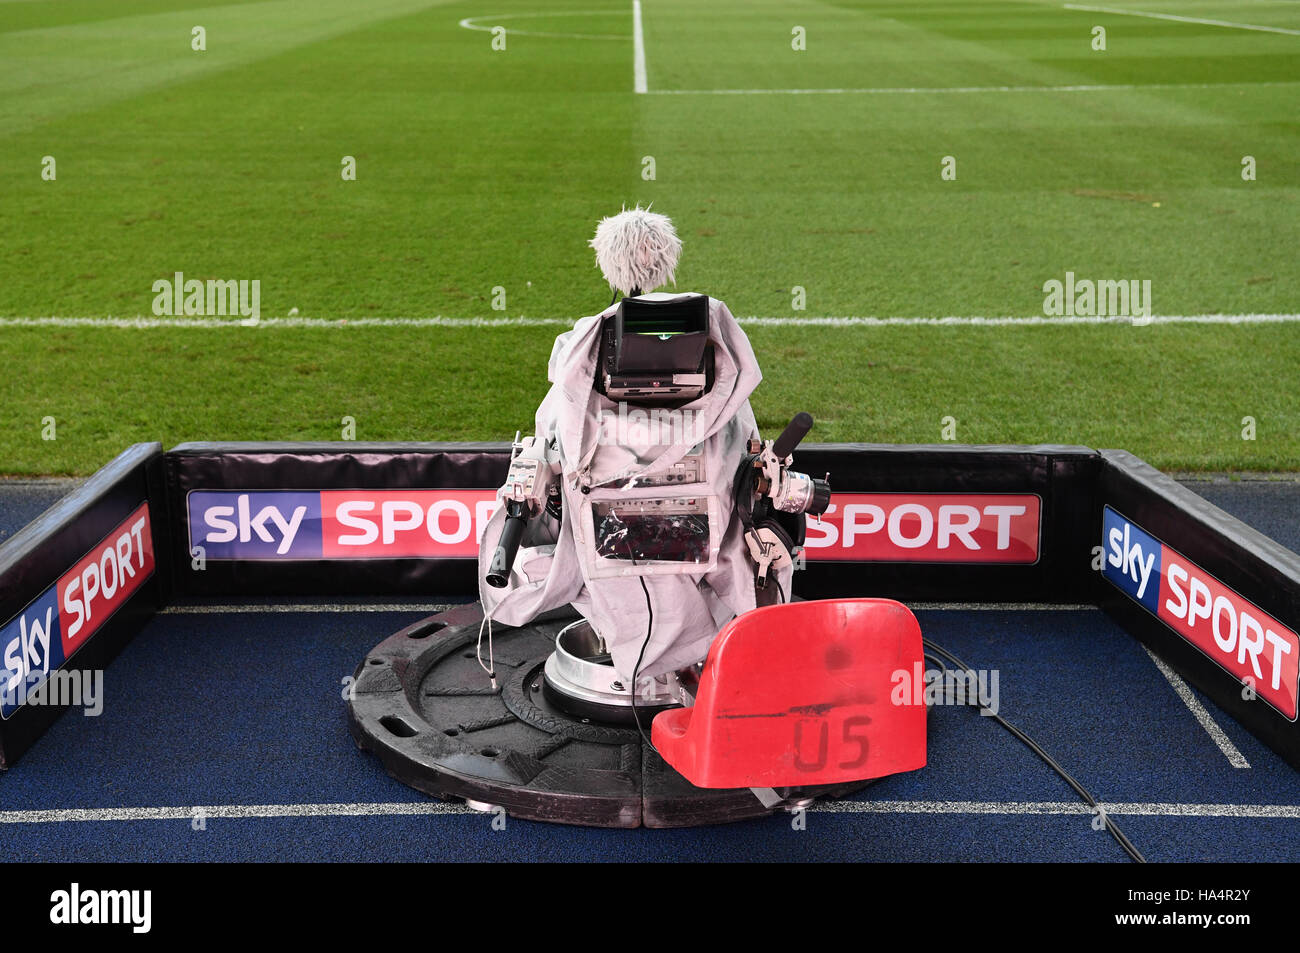 Berlin, Germany. 27th Nov, 2016. A TV cameria of the channel Sky Sport is places next to the side lines at the German Bundesliga soccer match between Hertha BSC and 1. FSV Mainz 05 at the Olympiastadium in Berlin, Germany, 27 November 2016. Photo: Soeren Stache/dpa/Alamy Live News Stock Photo